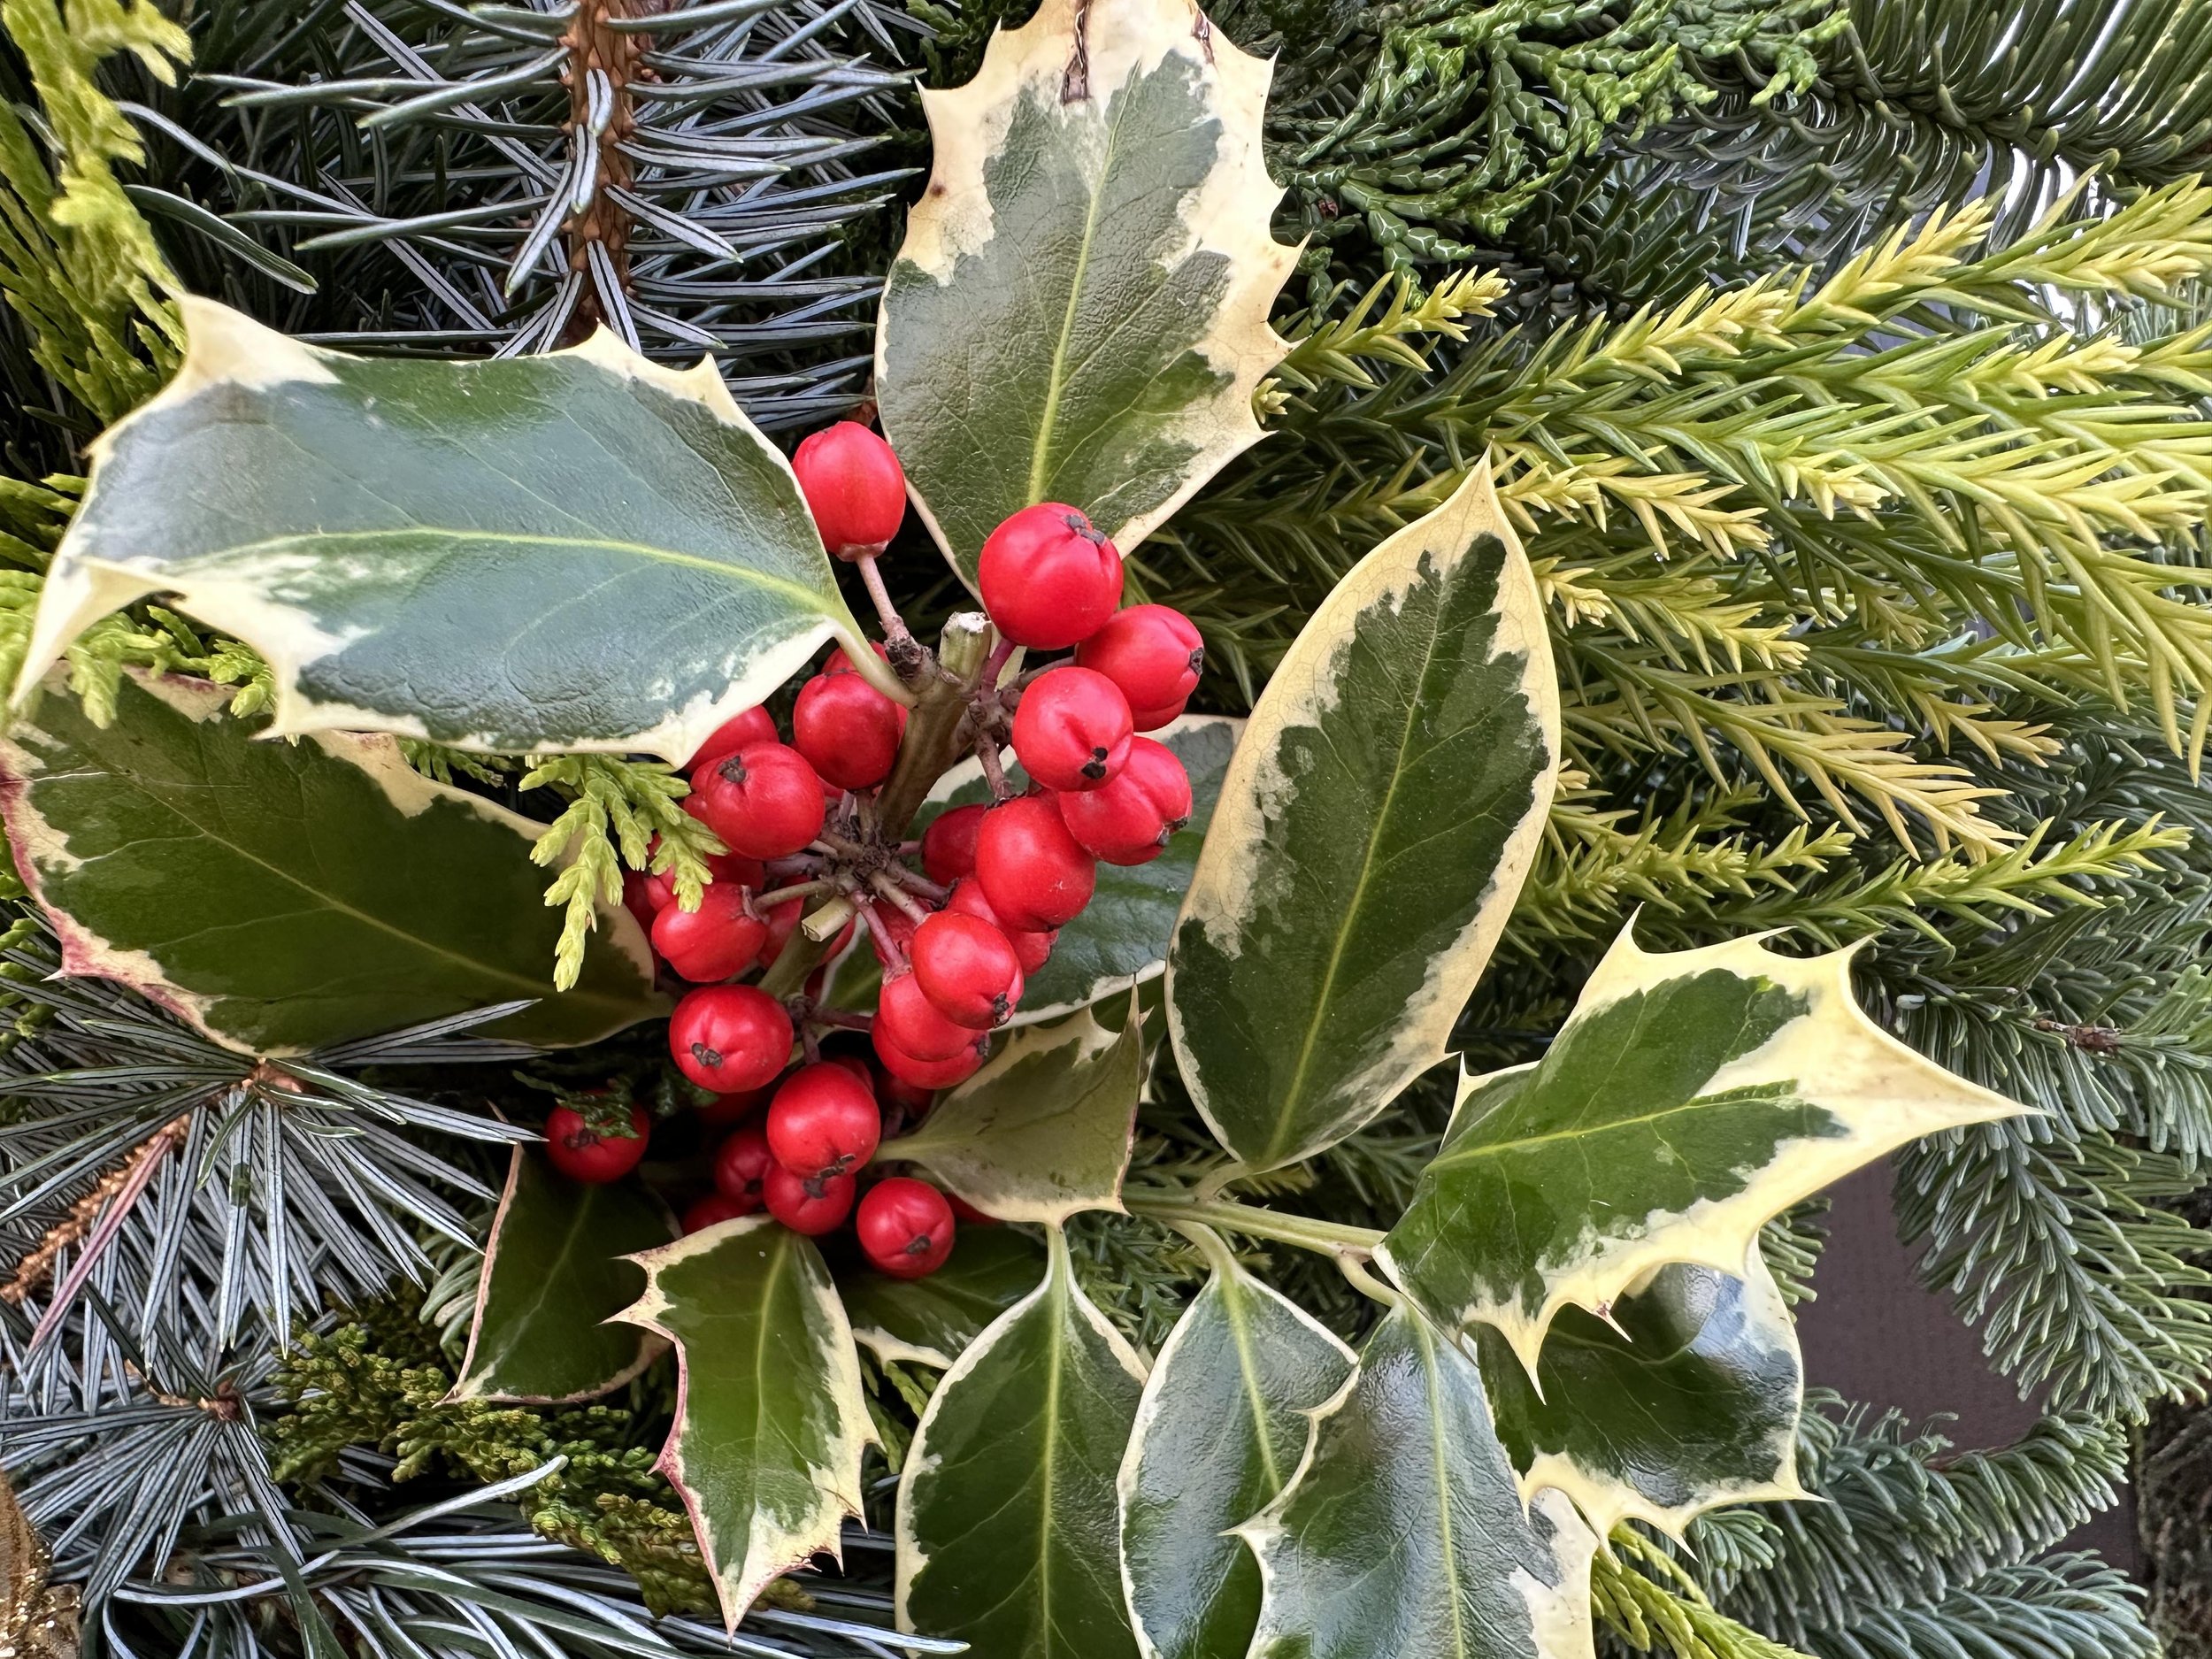 variegated holly bunches on wreath.jpg